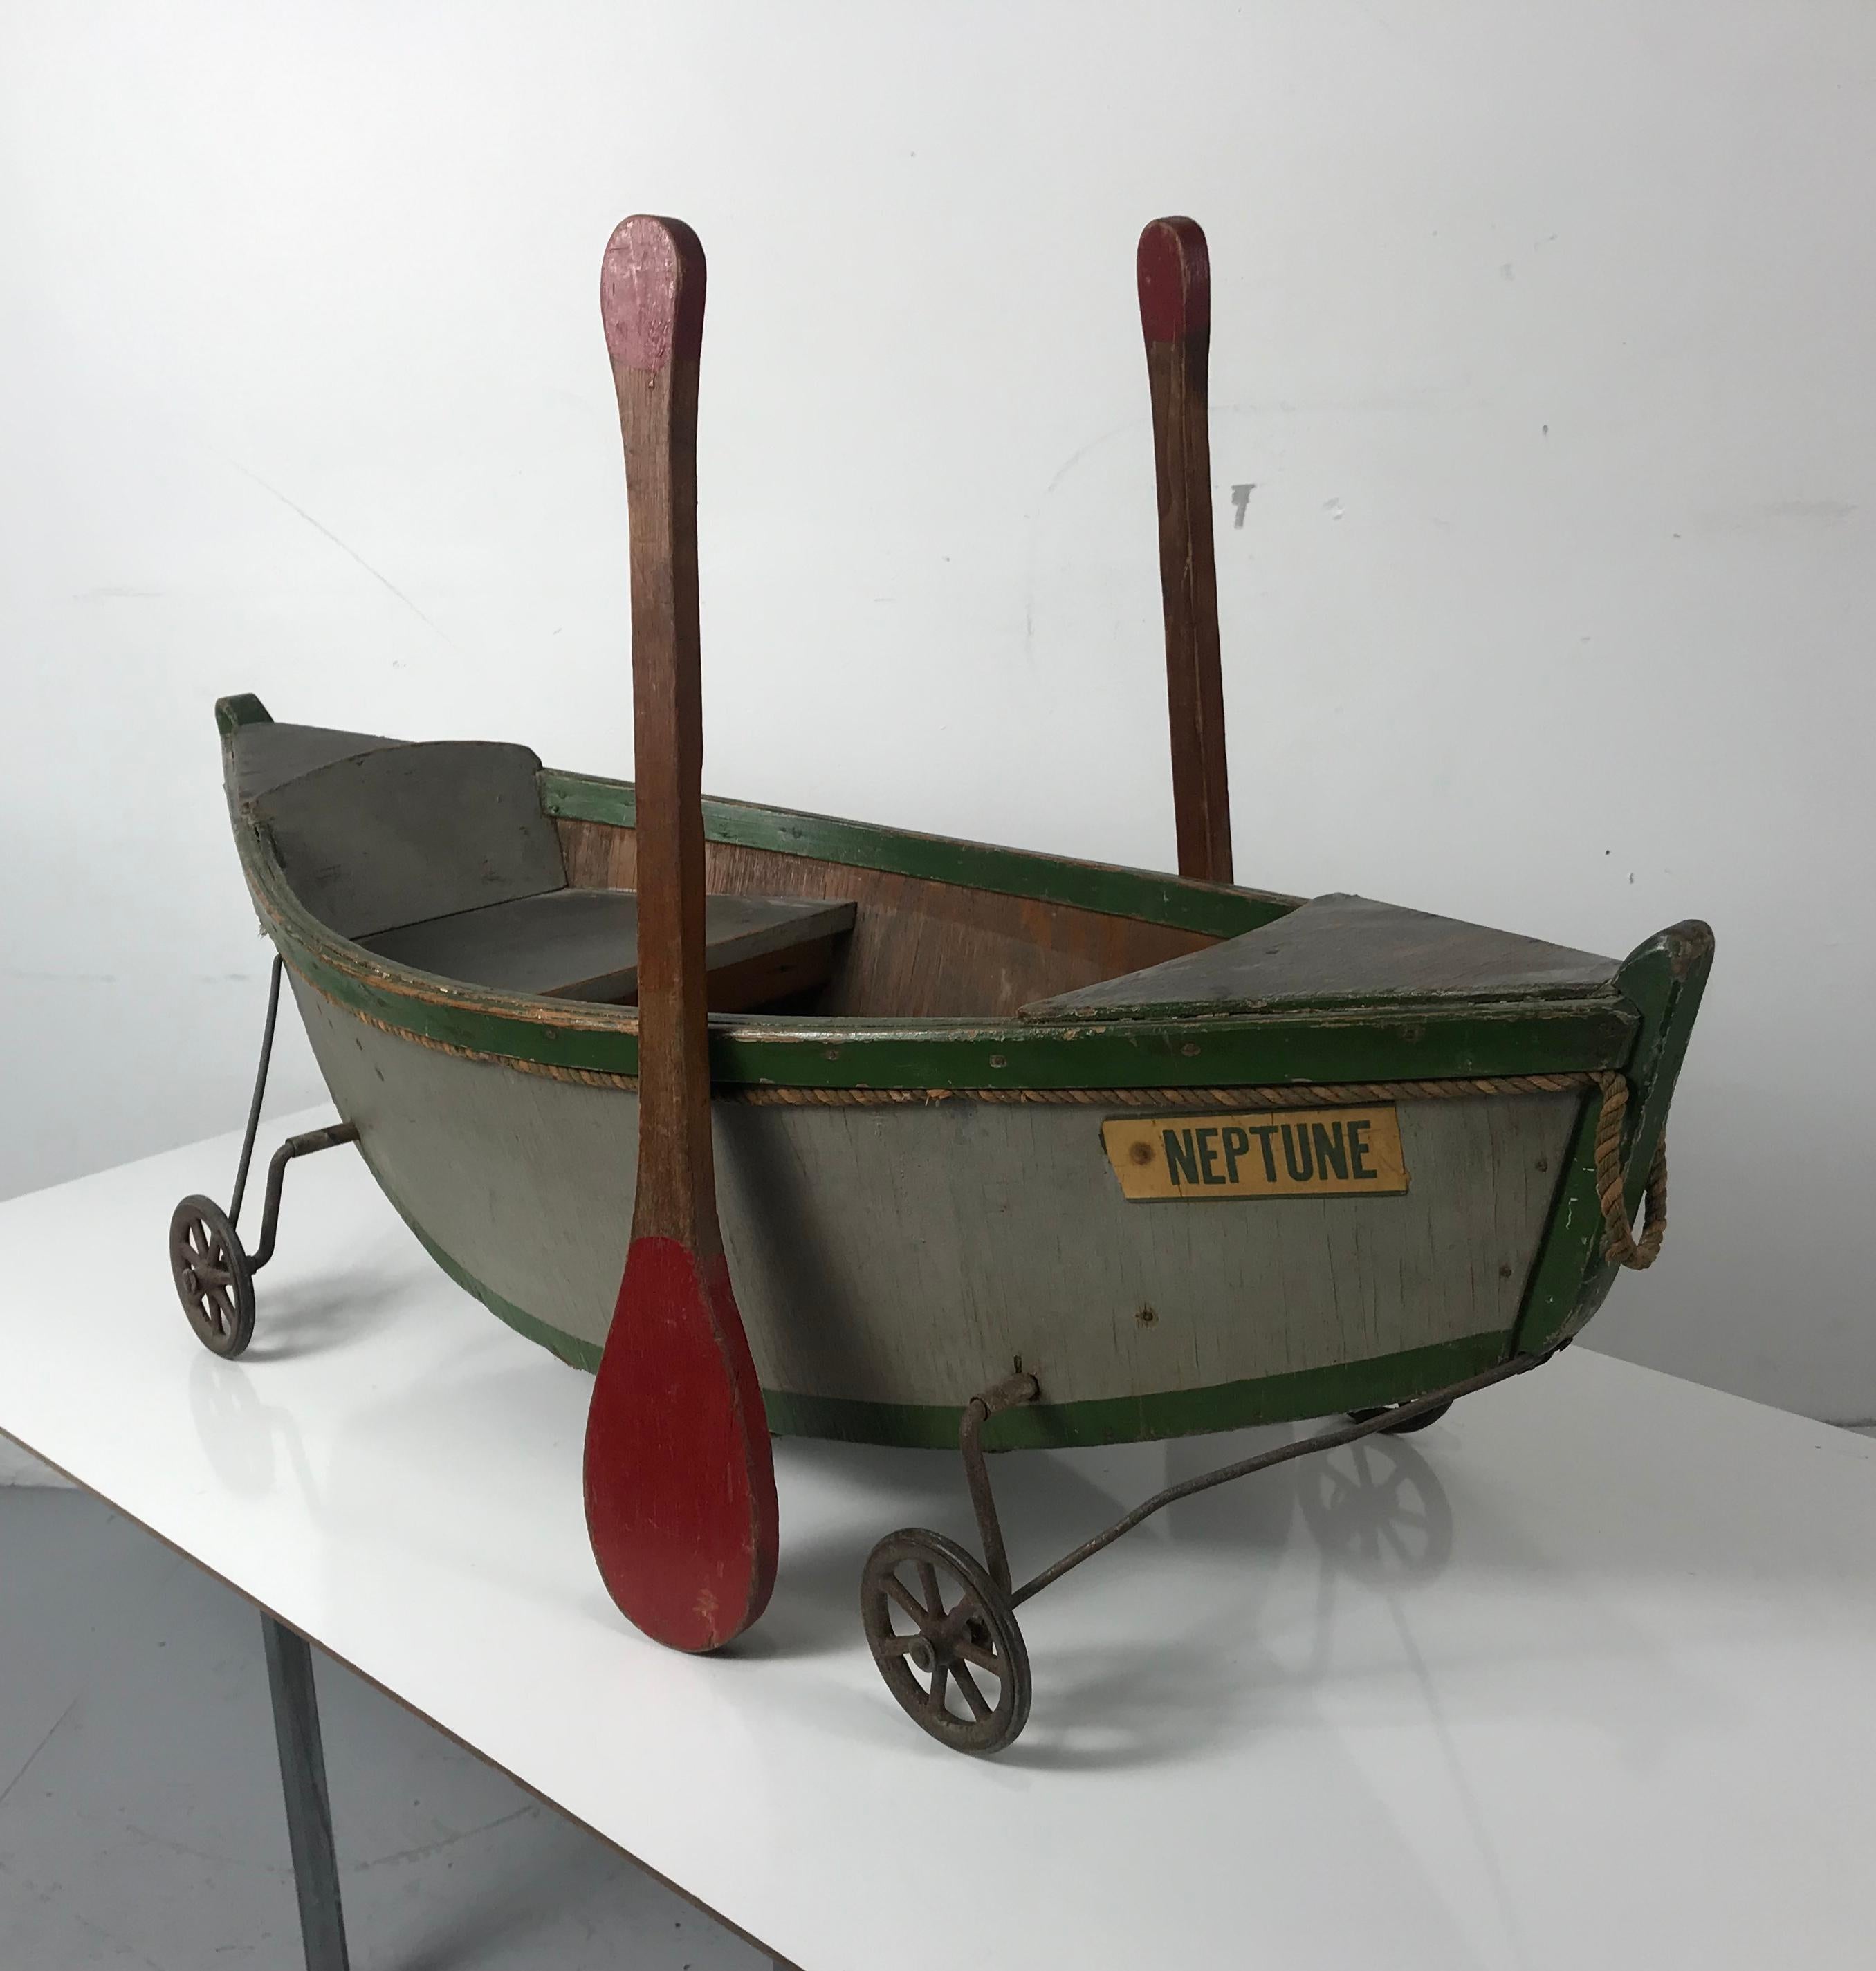 English Rare Antique Wooden Child's Ride on Wooden Toy Boat by Nautilus Toy Co. London  For Sale